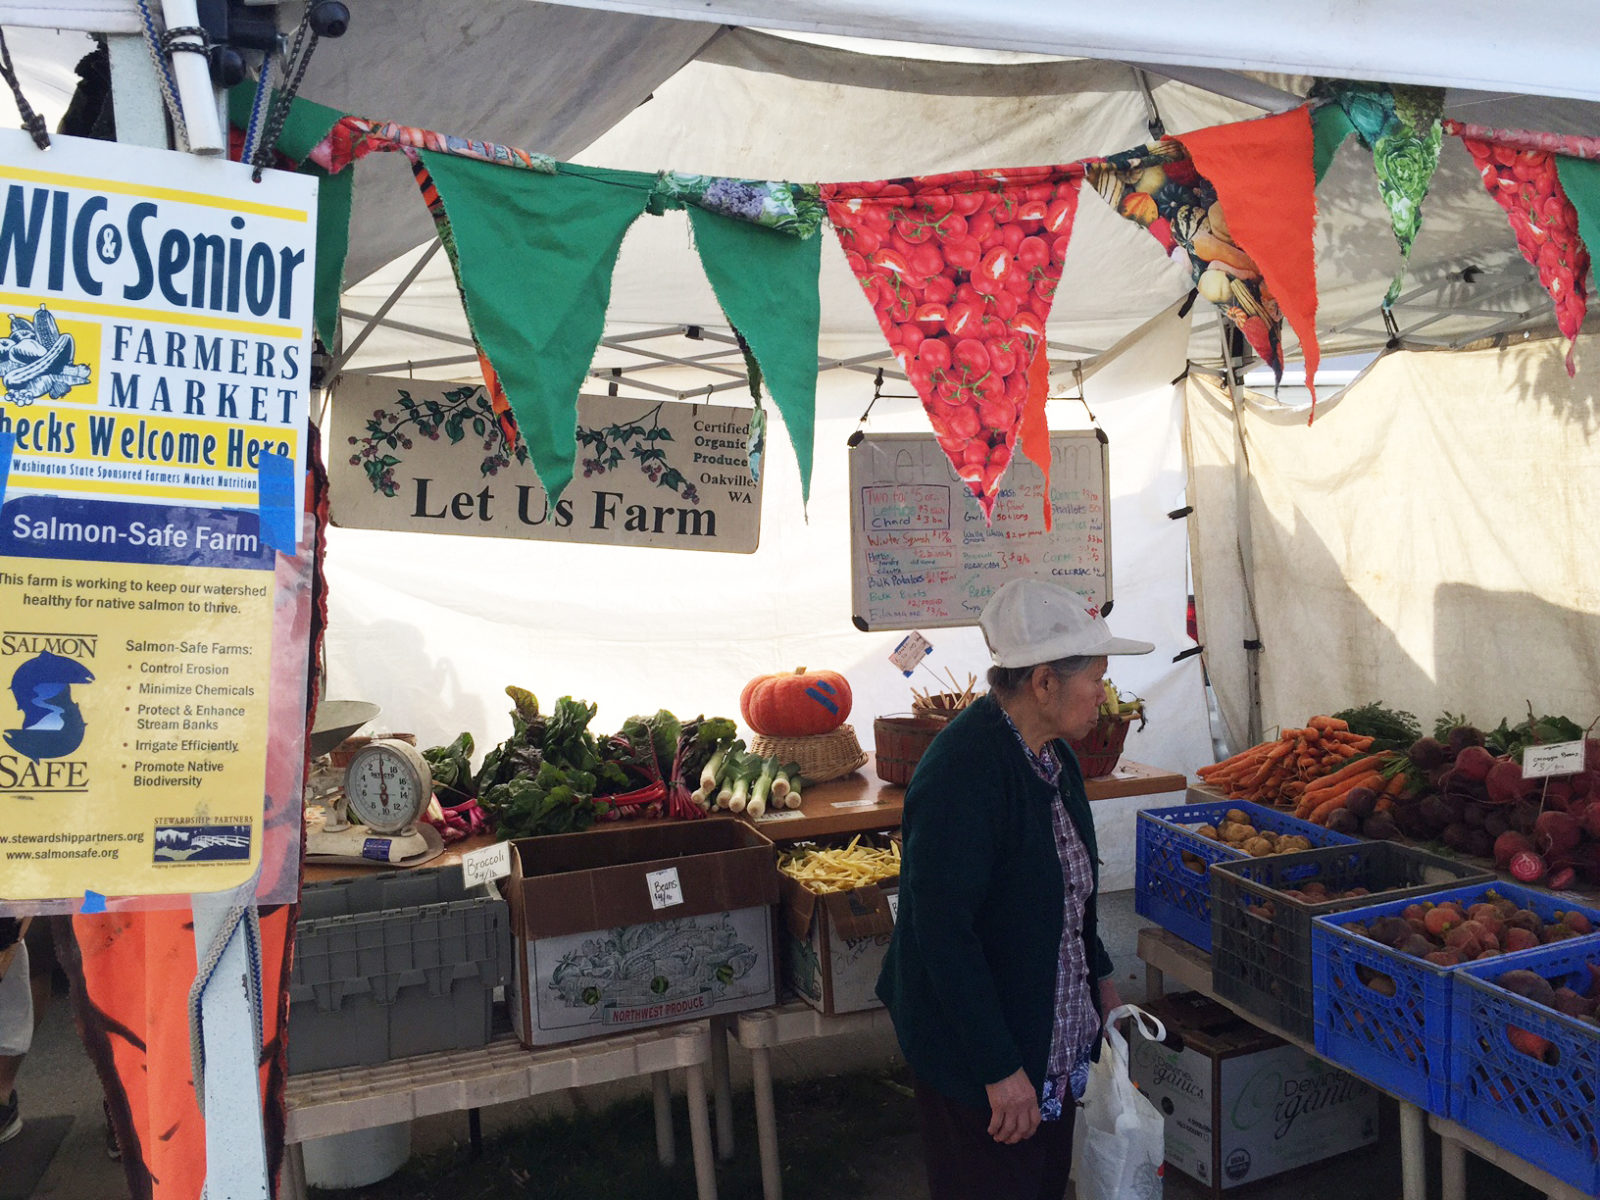 photo from a local farmers market shows fresh produce and a sign for the Senior Farmers Market Nutrition Program described in this article